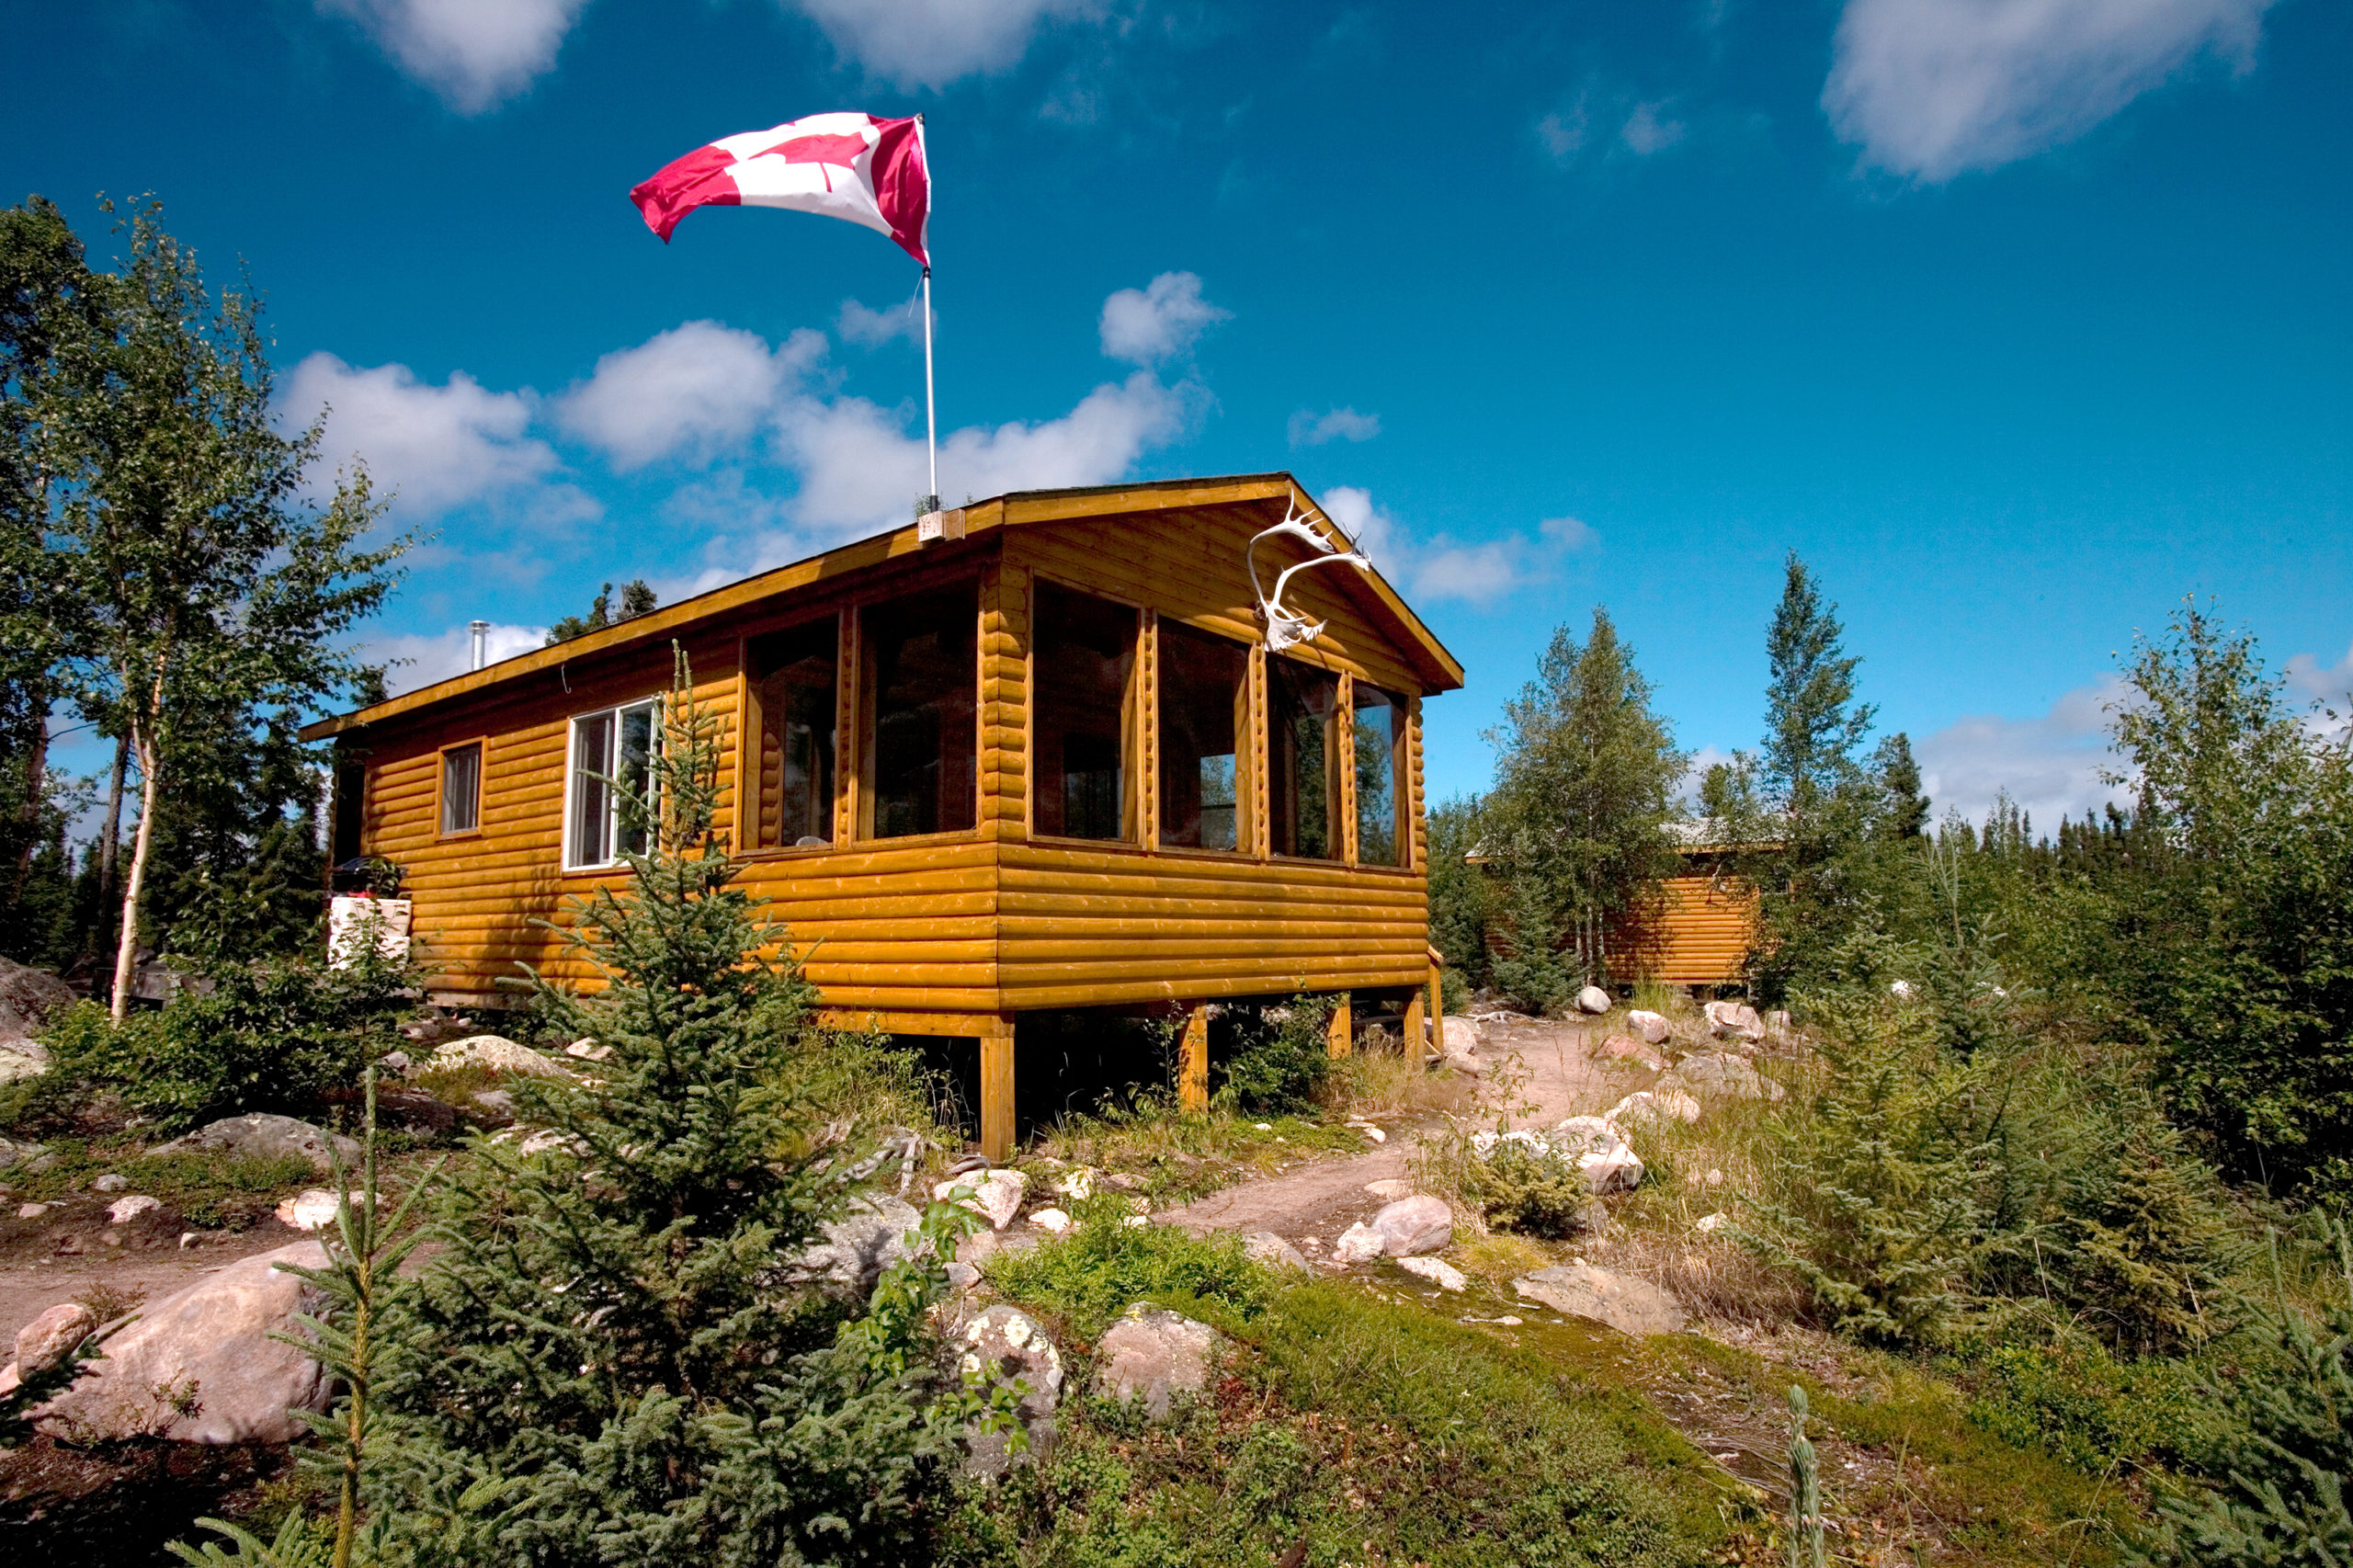 Gangler's Cabin on Maria Lake surround by blue skies and a raised Canadian flag